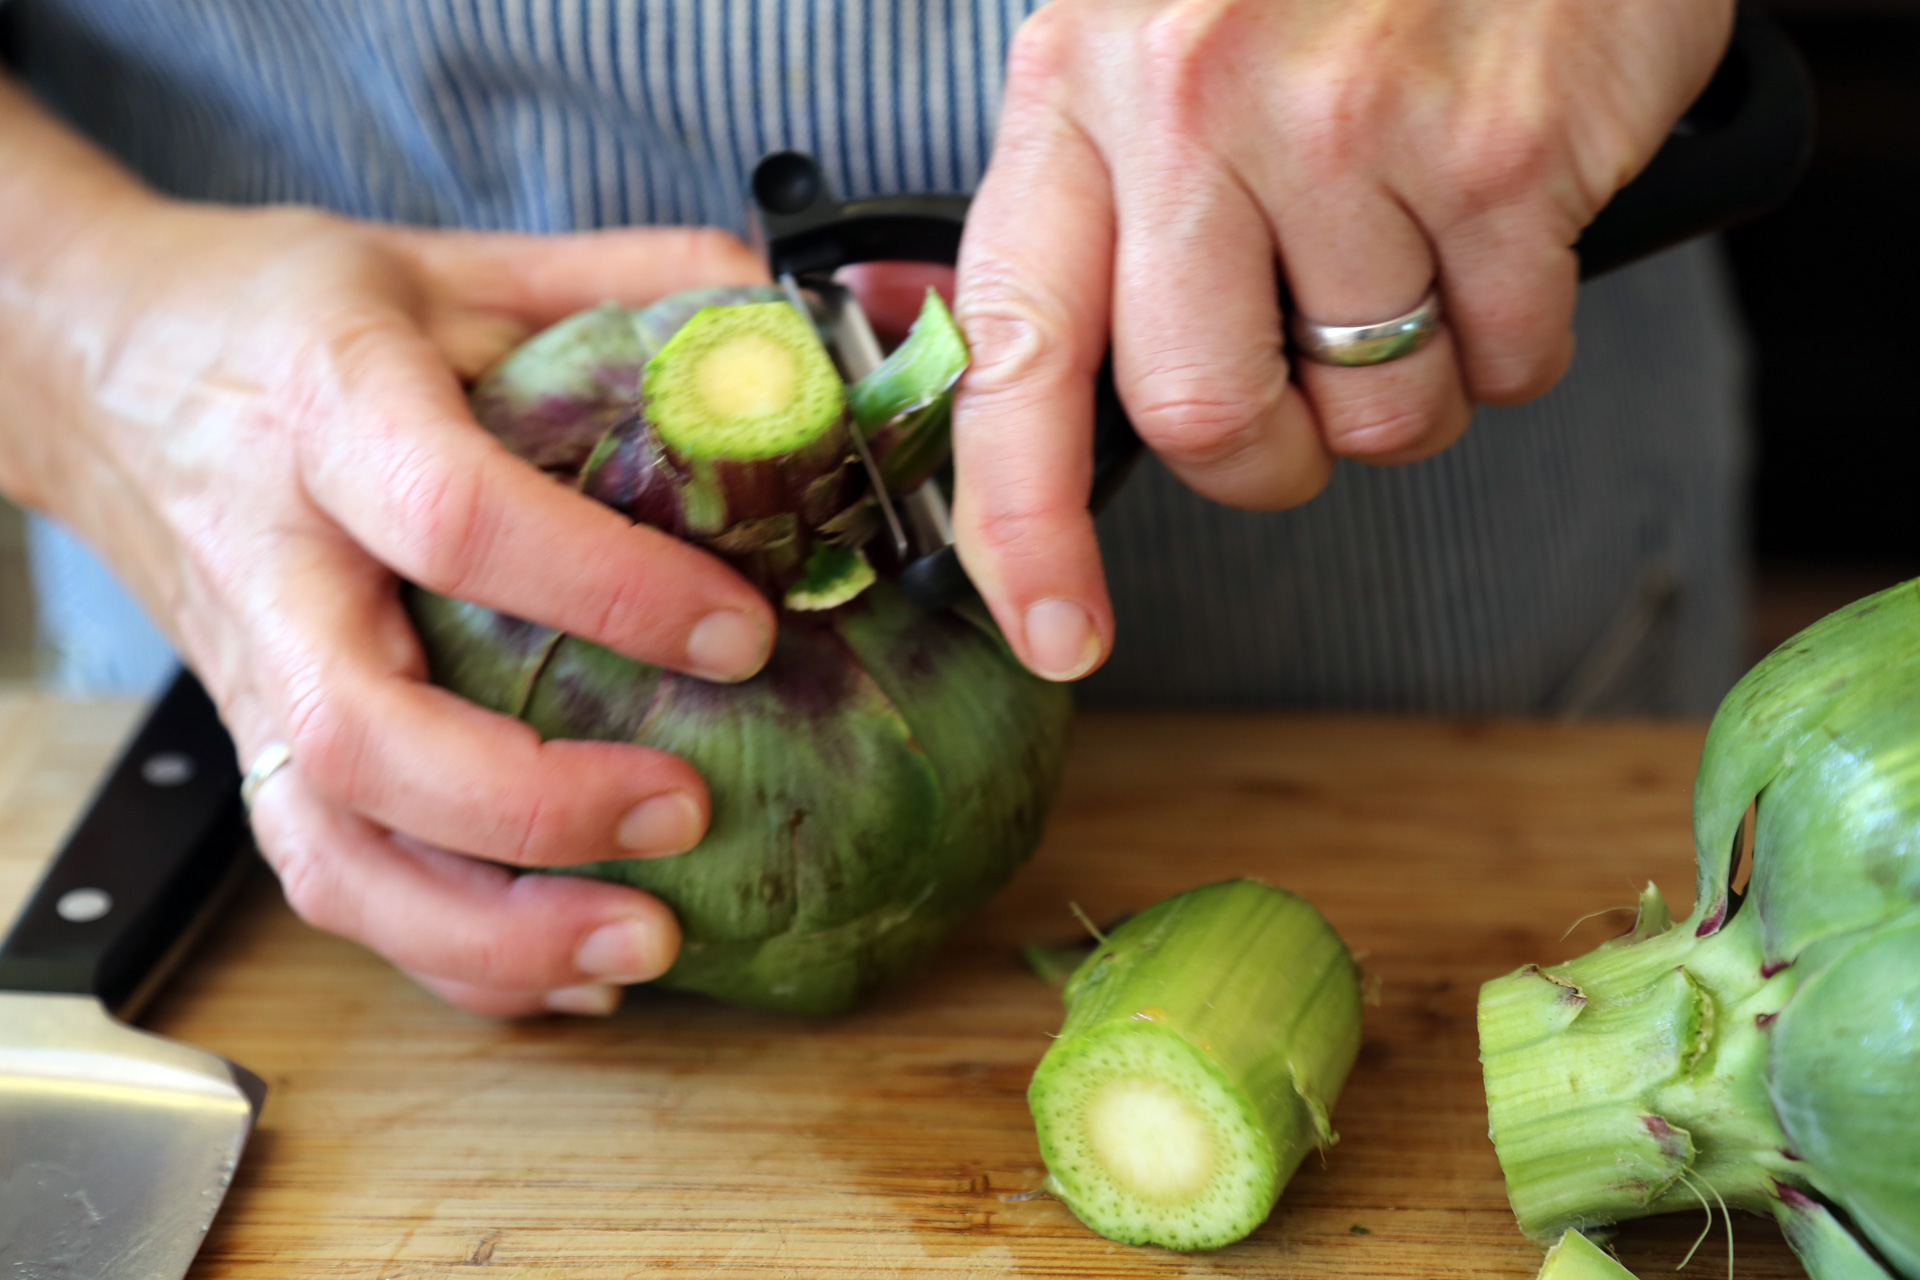 Using a paring knife or peeler, trim the stem and peel away the tough outer fibers.